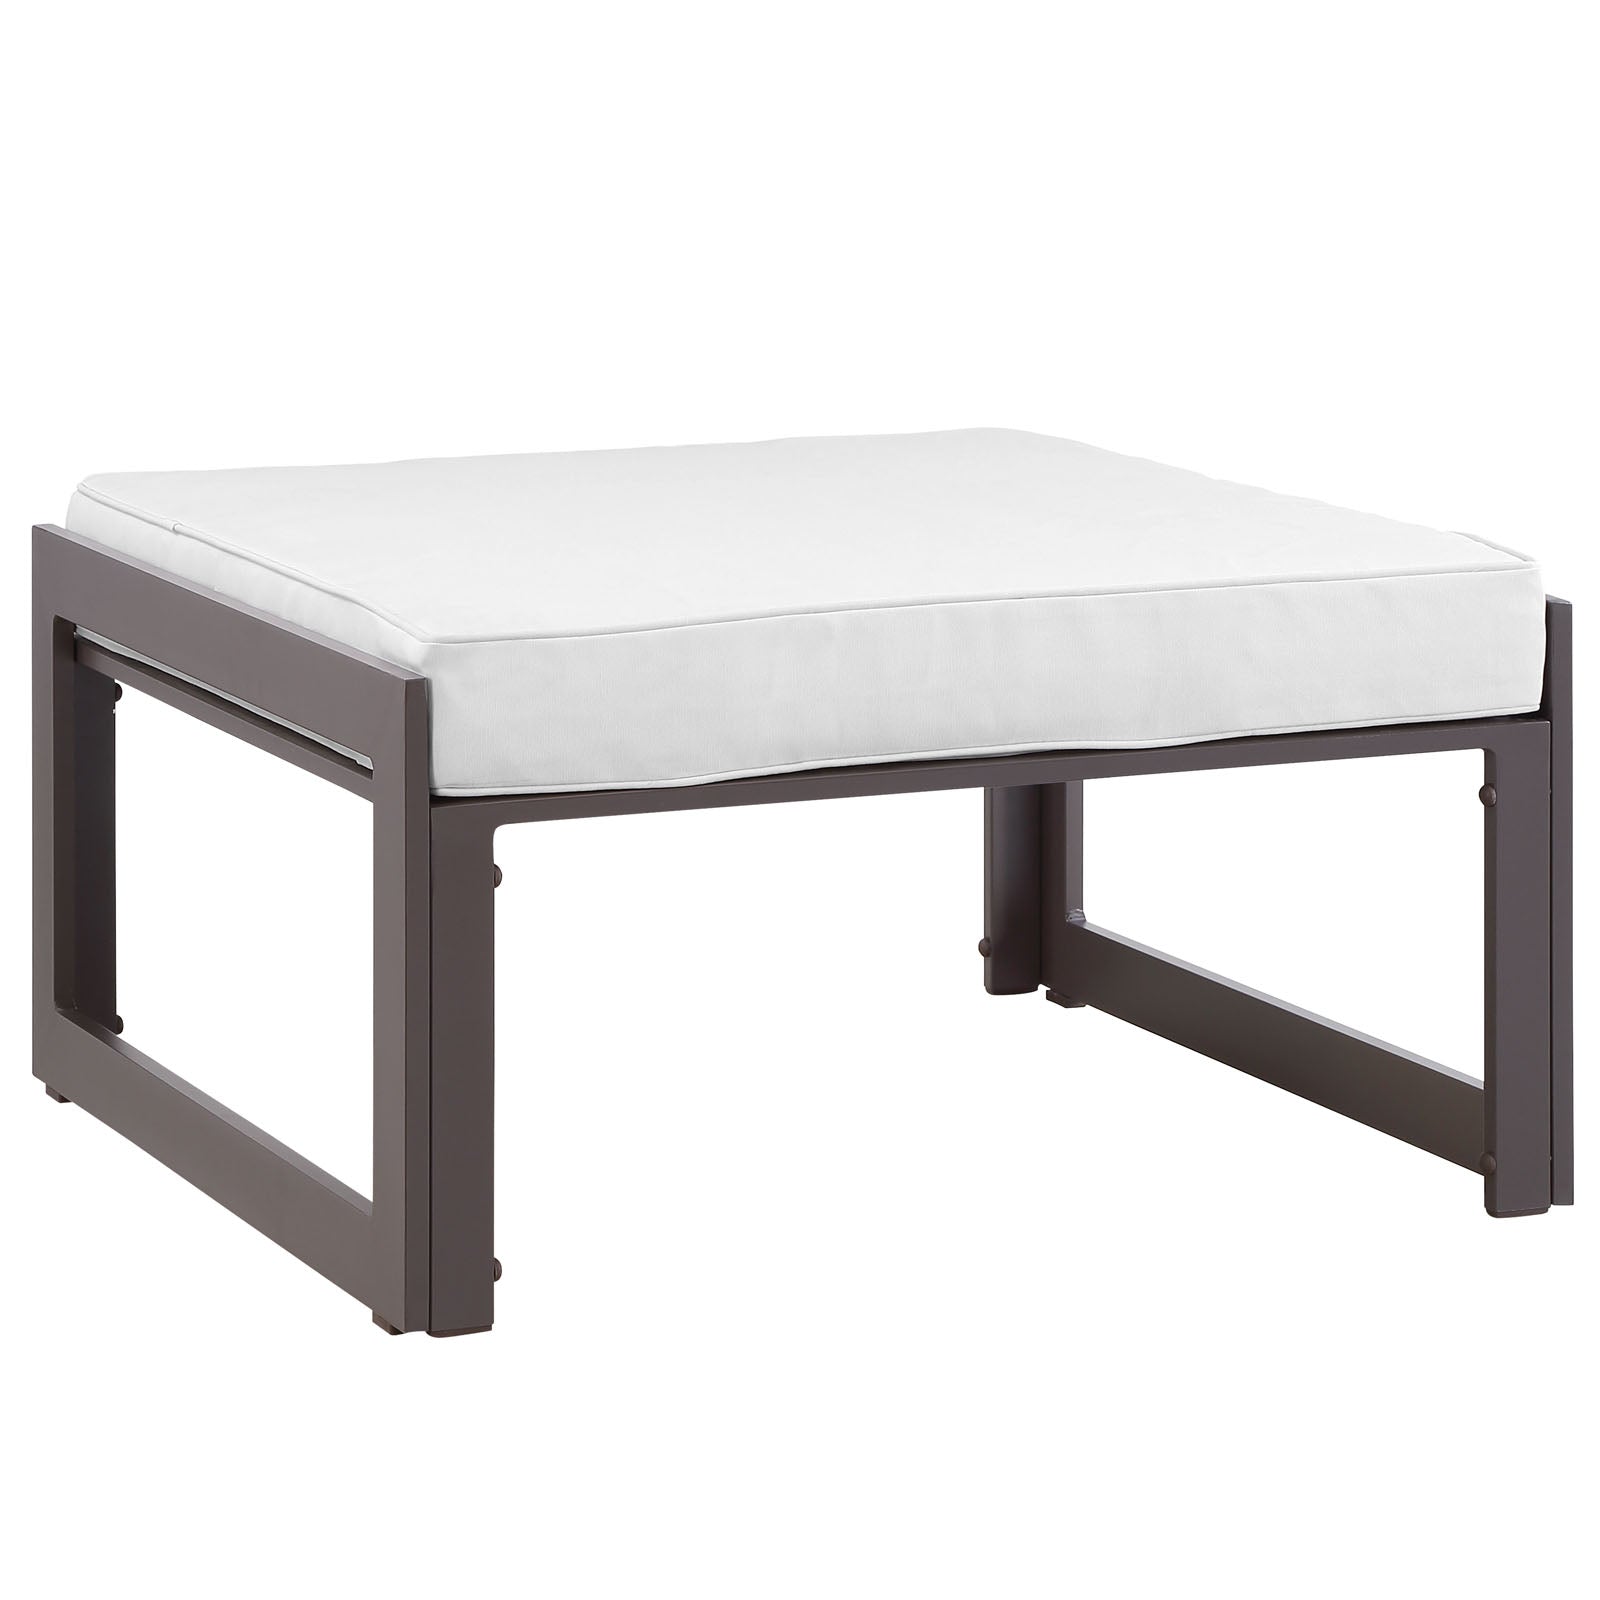 Modway Outdoor Stools & Benches - Fortuna Outdoor Ottoman Brown & White